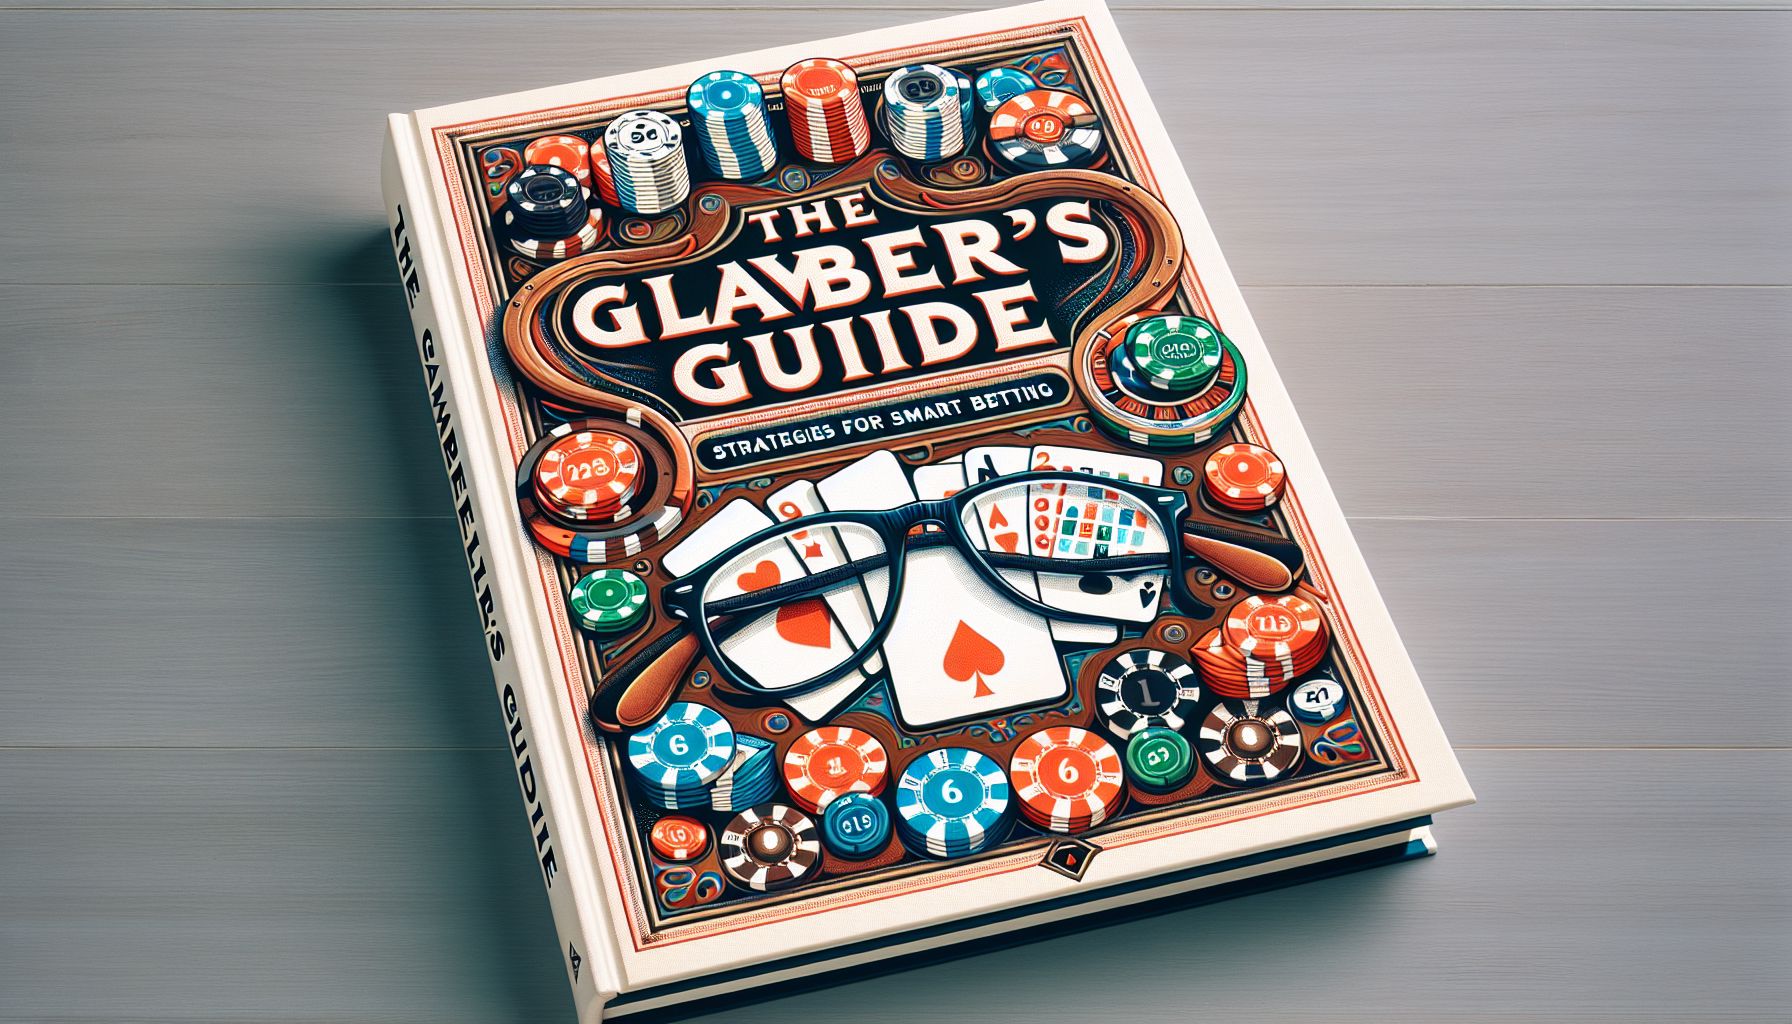 The Gambler’s Guide: Strategies for Smart Betting